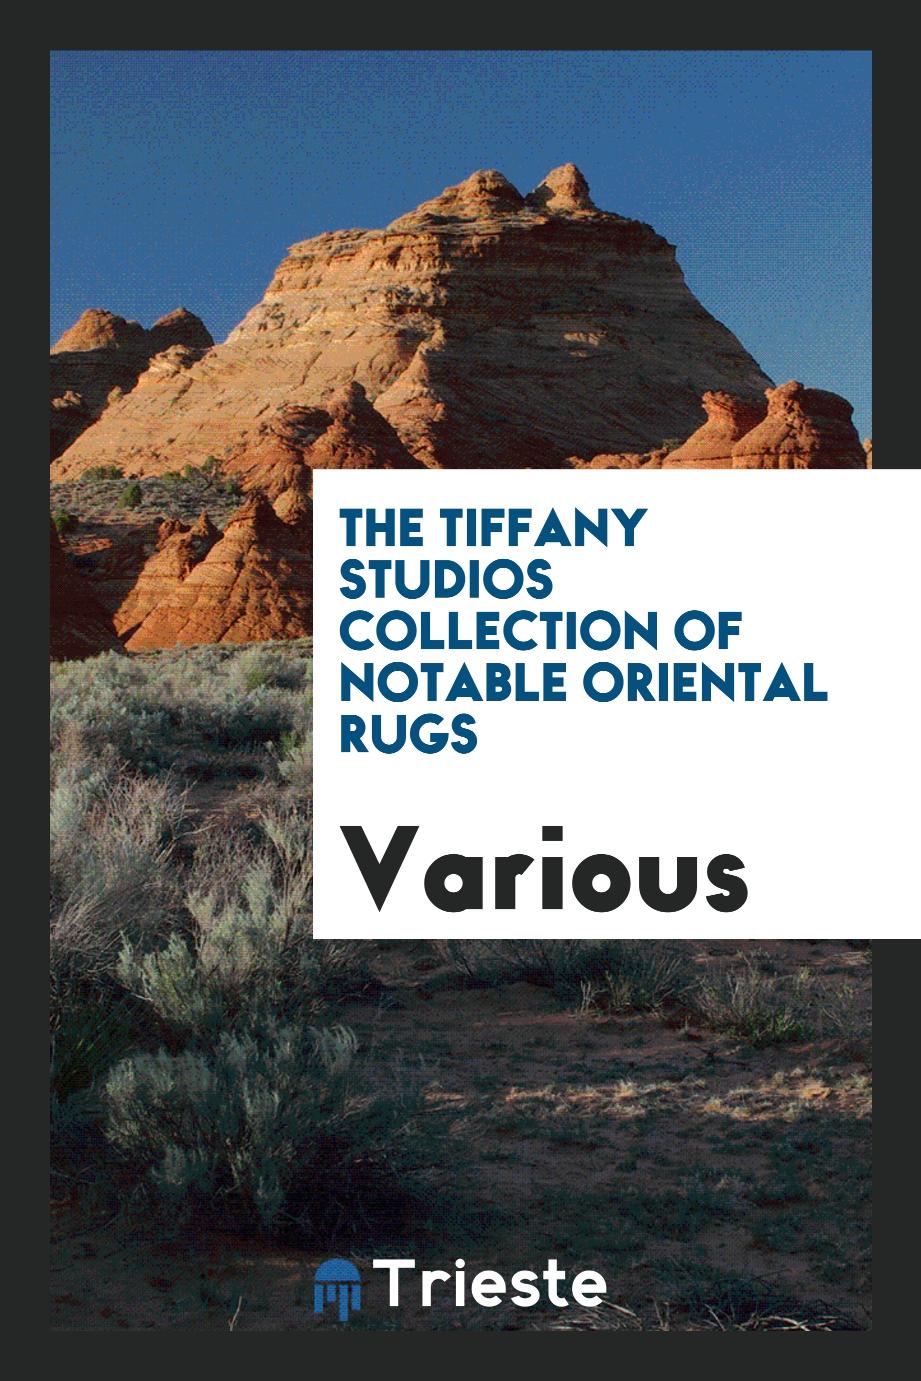 The Tiffany Studios Collection of Notable Oriental Rugs